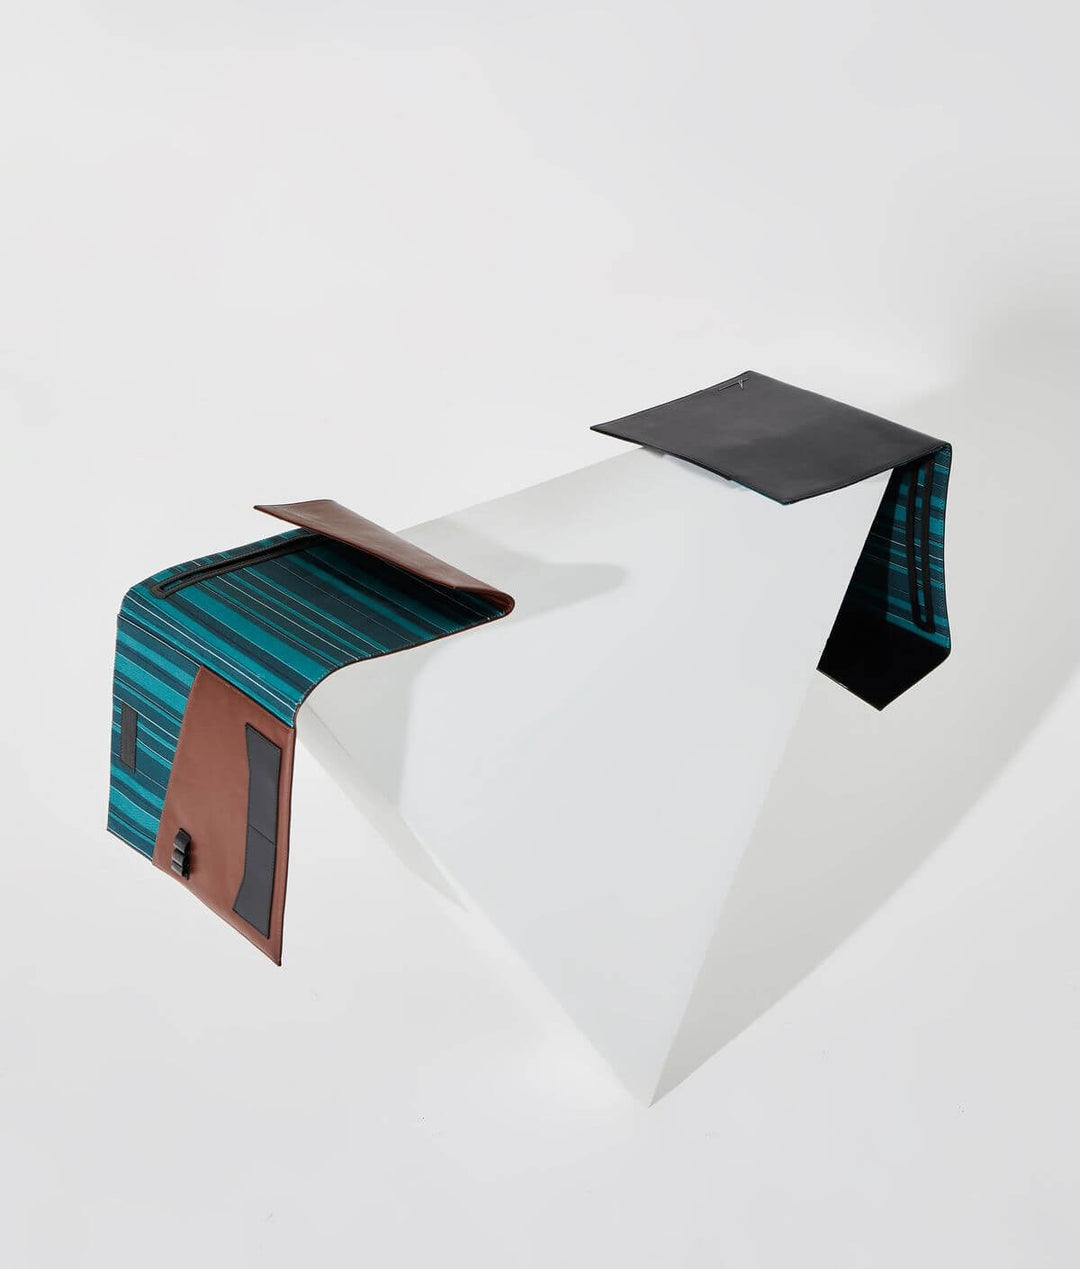 Modern abstract sculpture with geometric shapes and contrasting materials on a white background